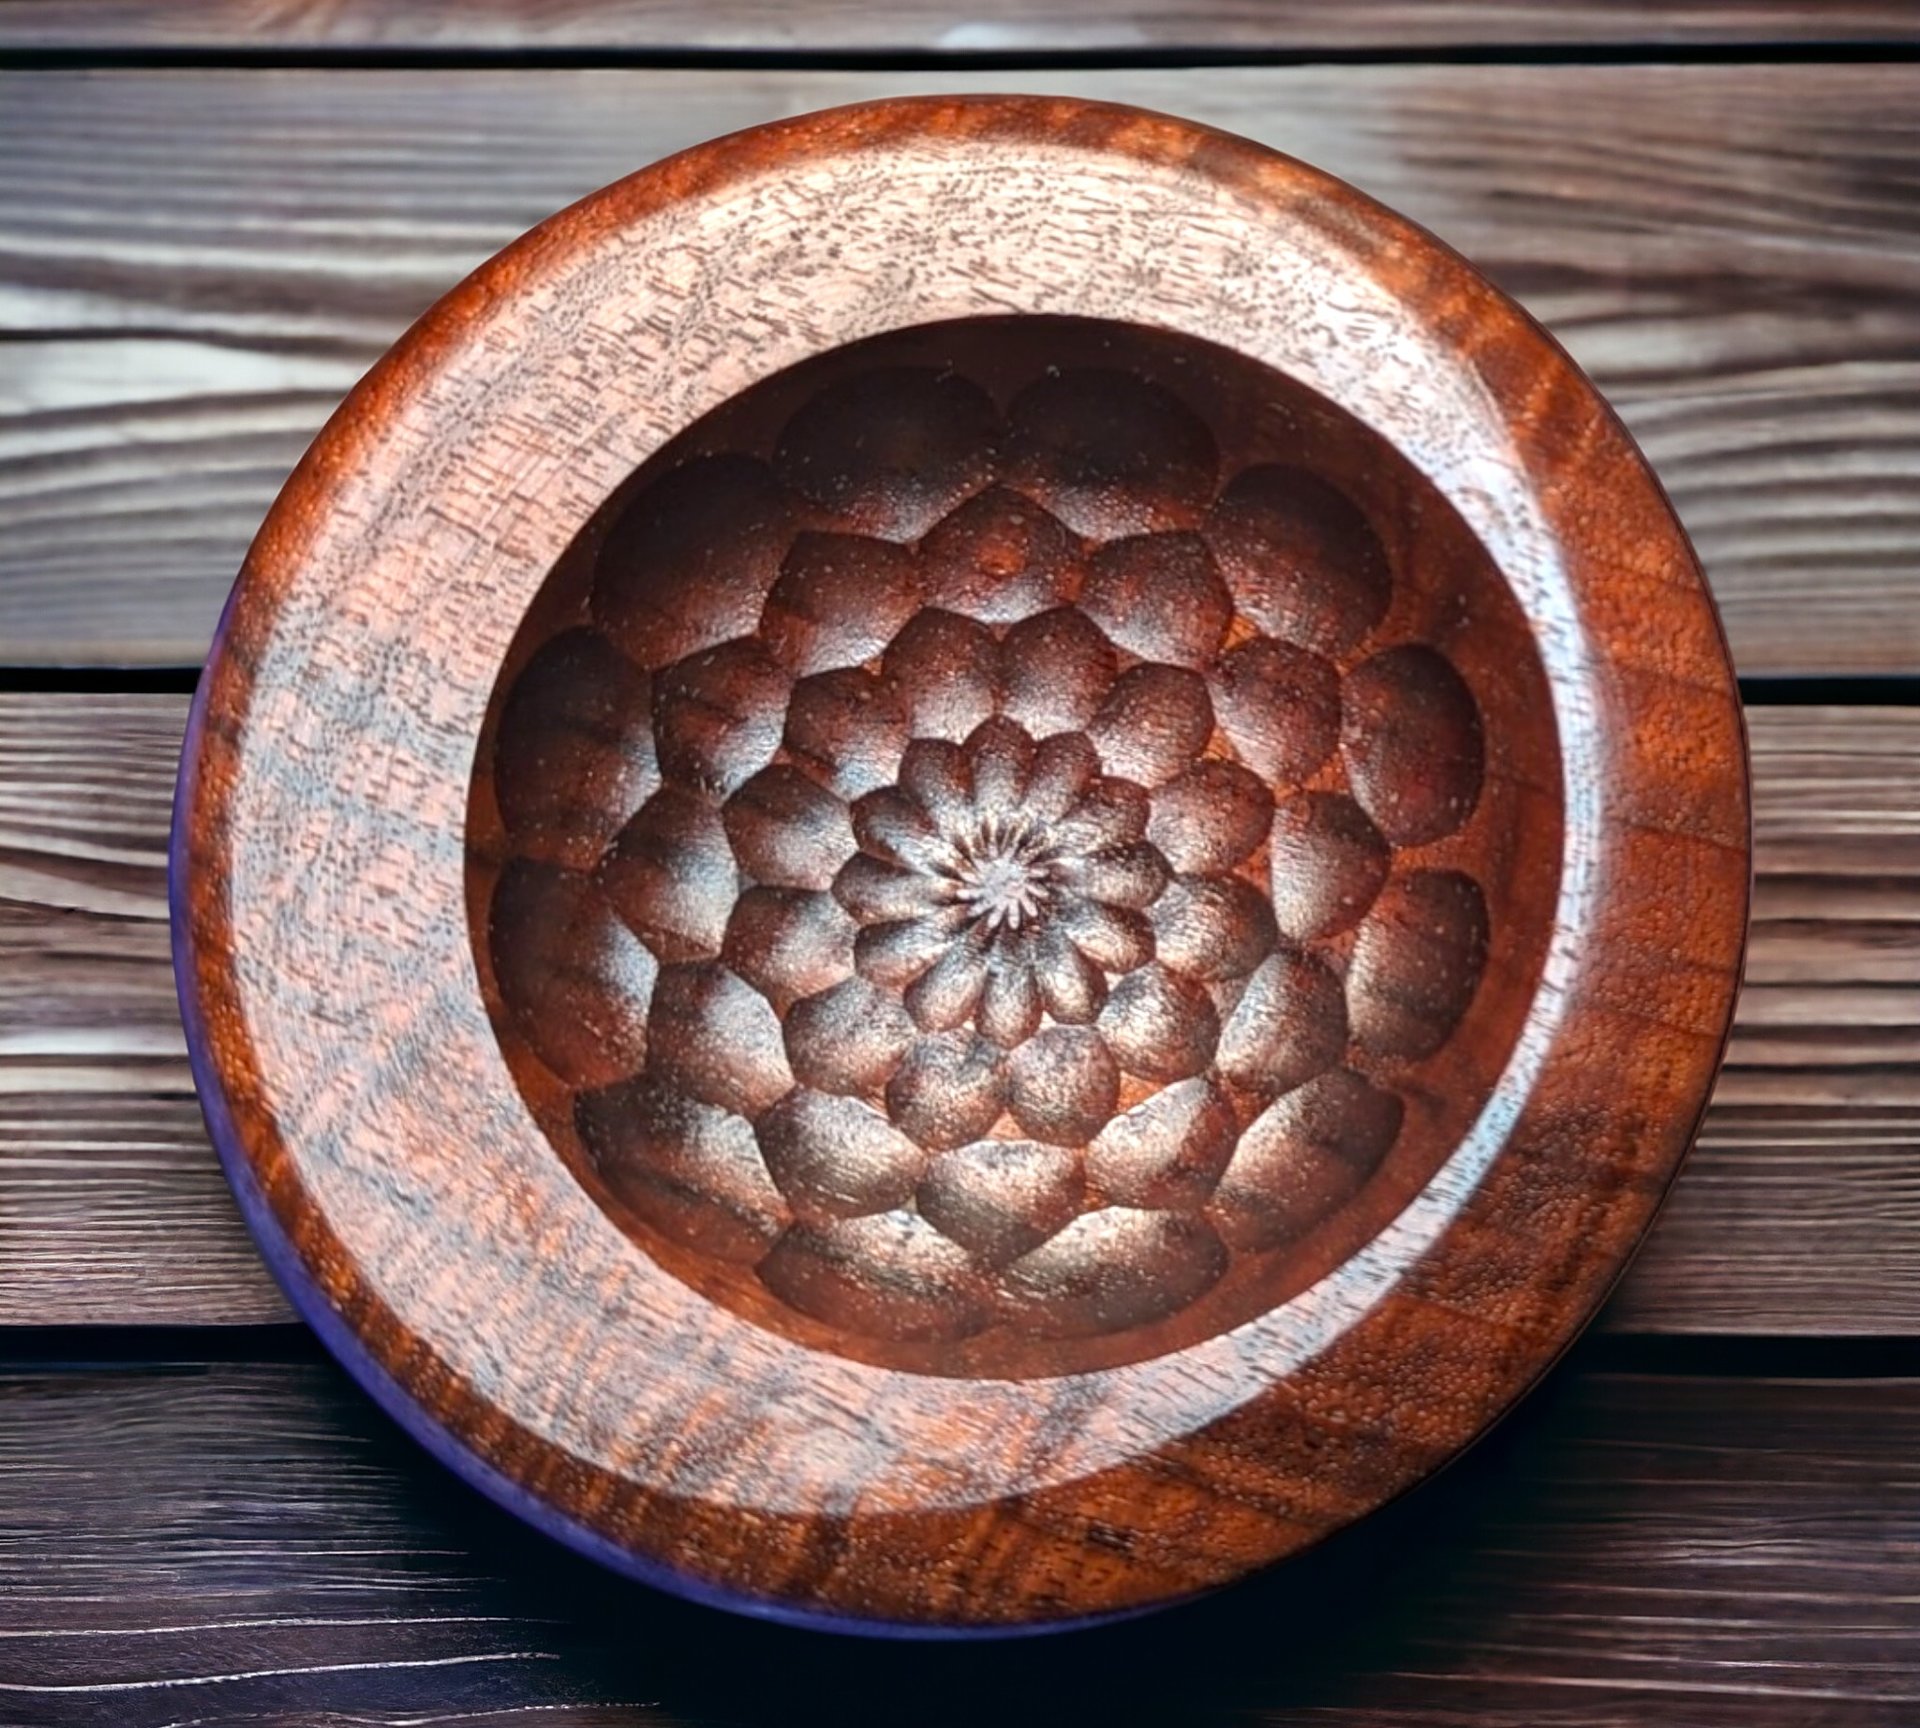 Multi-axis figured walnut bowl with rose engine accents